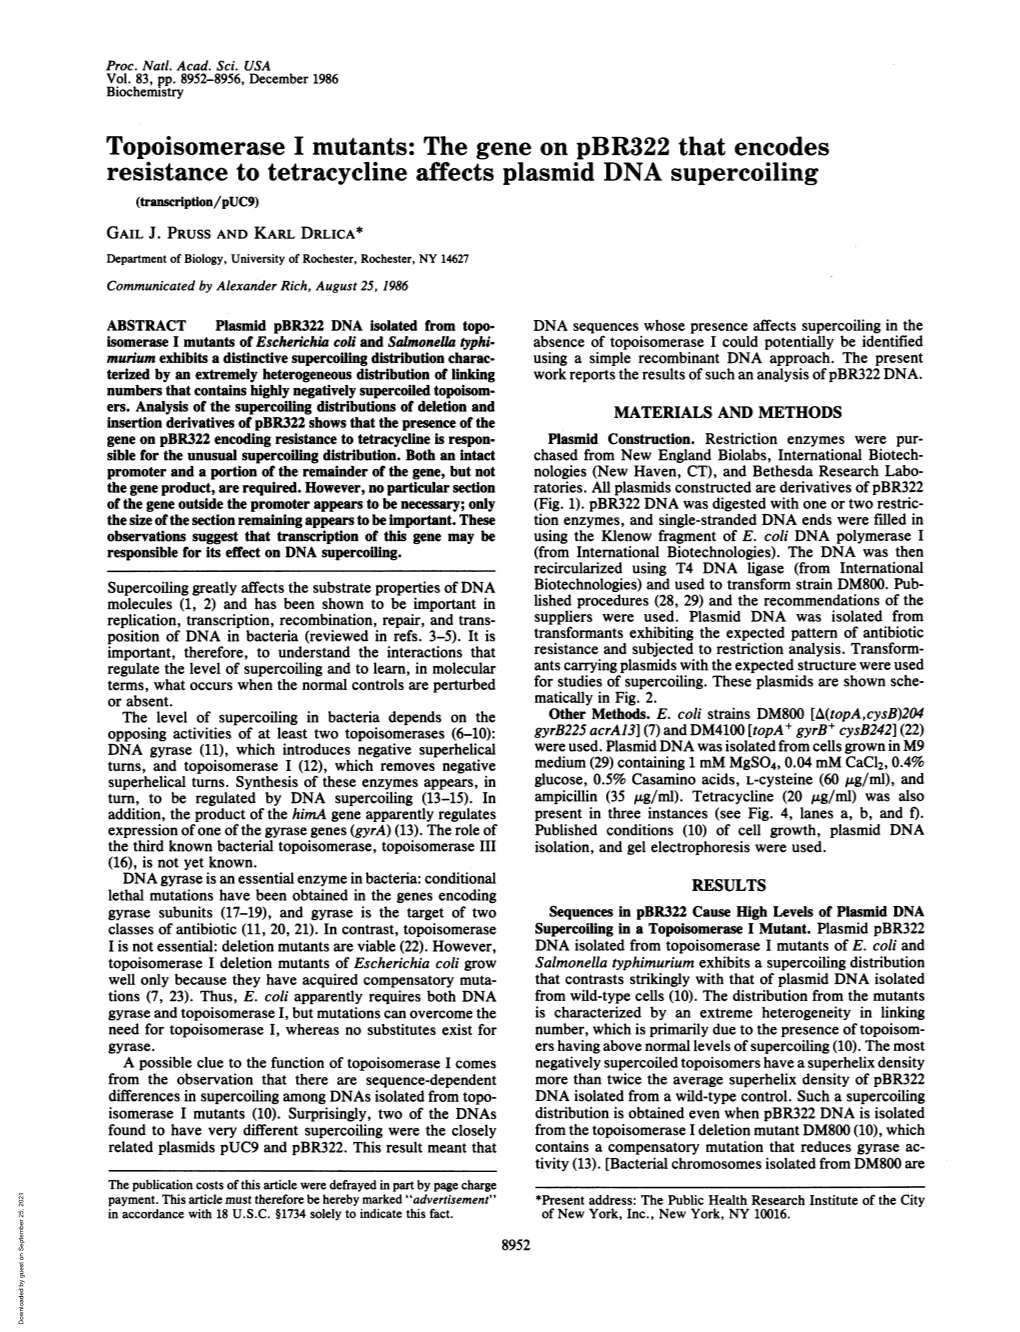 Resistance to Tetracycline Affects Plasmid DNA Supercoiling (Transcription/Puc9) GAIL J